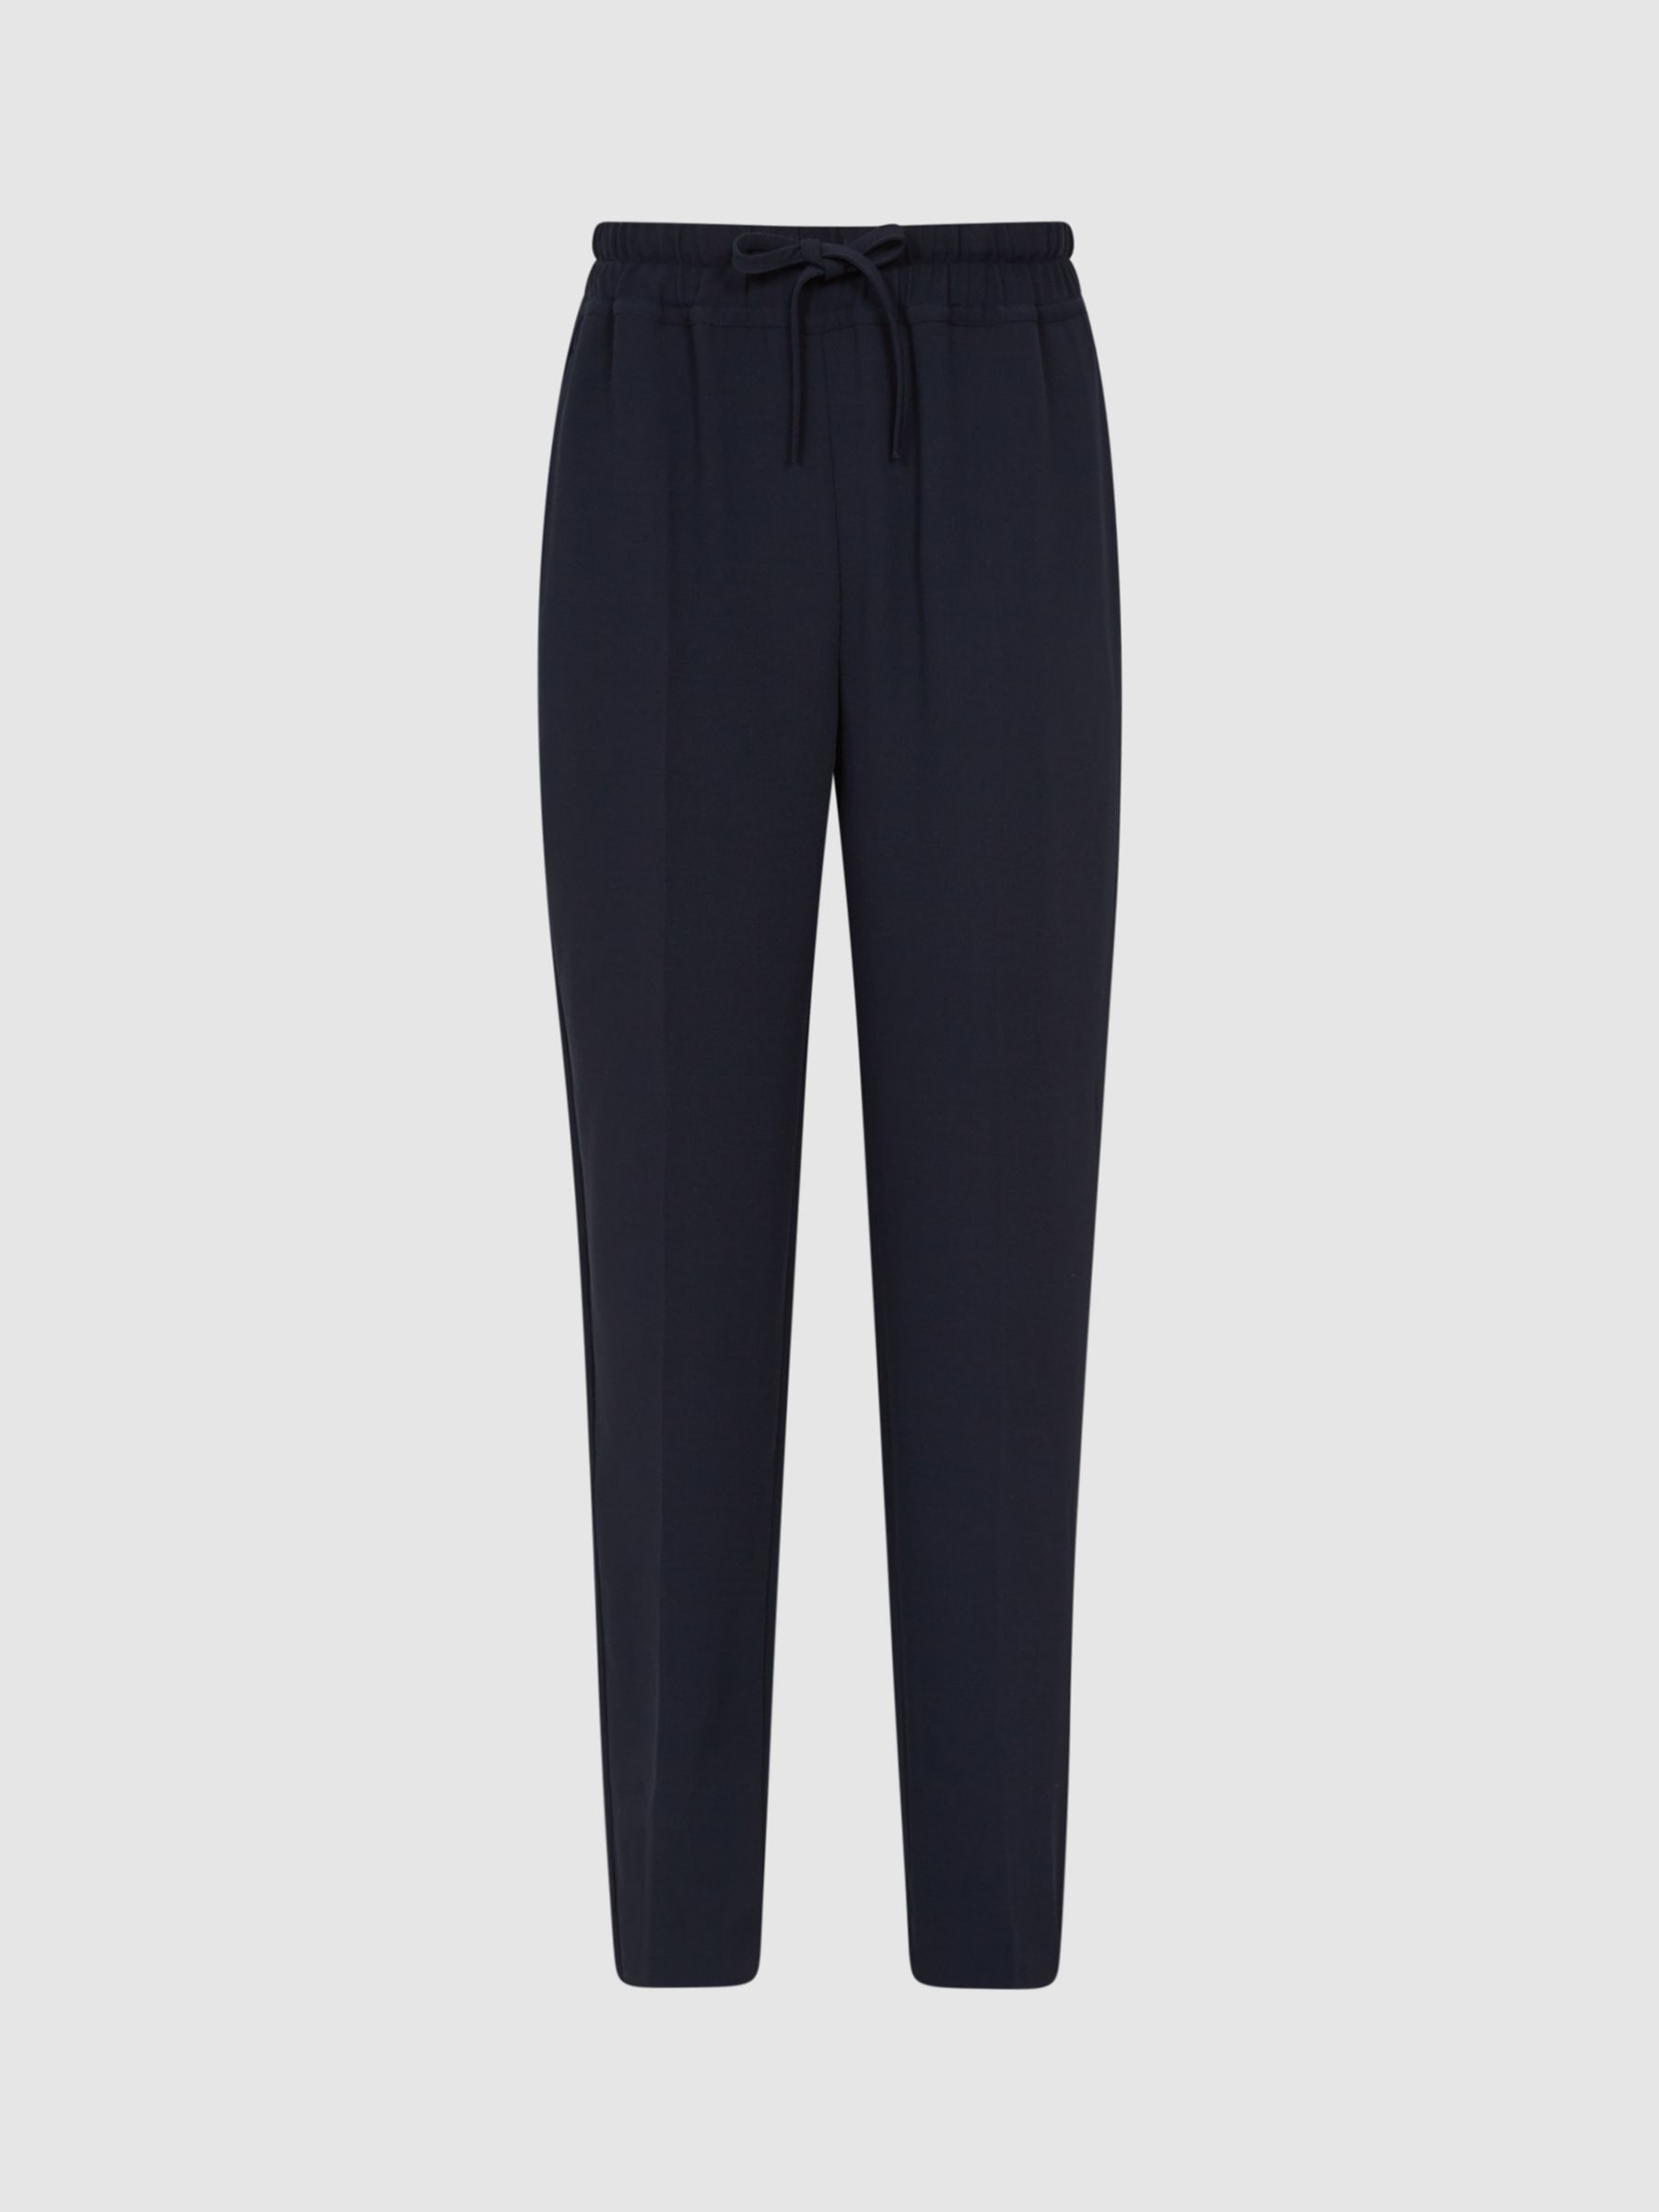 Reiss Petite Hailey Cropped Trousers, Navy at John Lewis & Partners